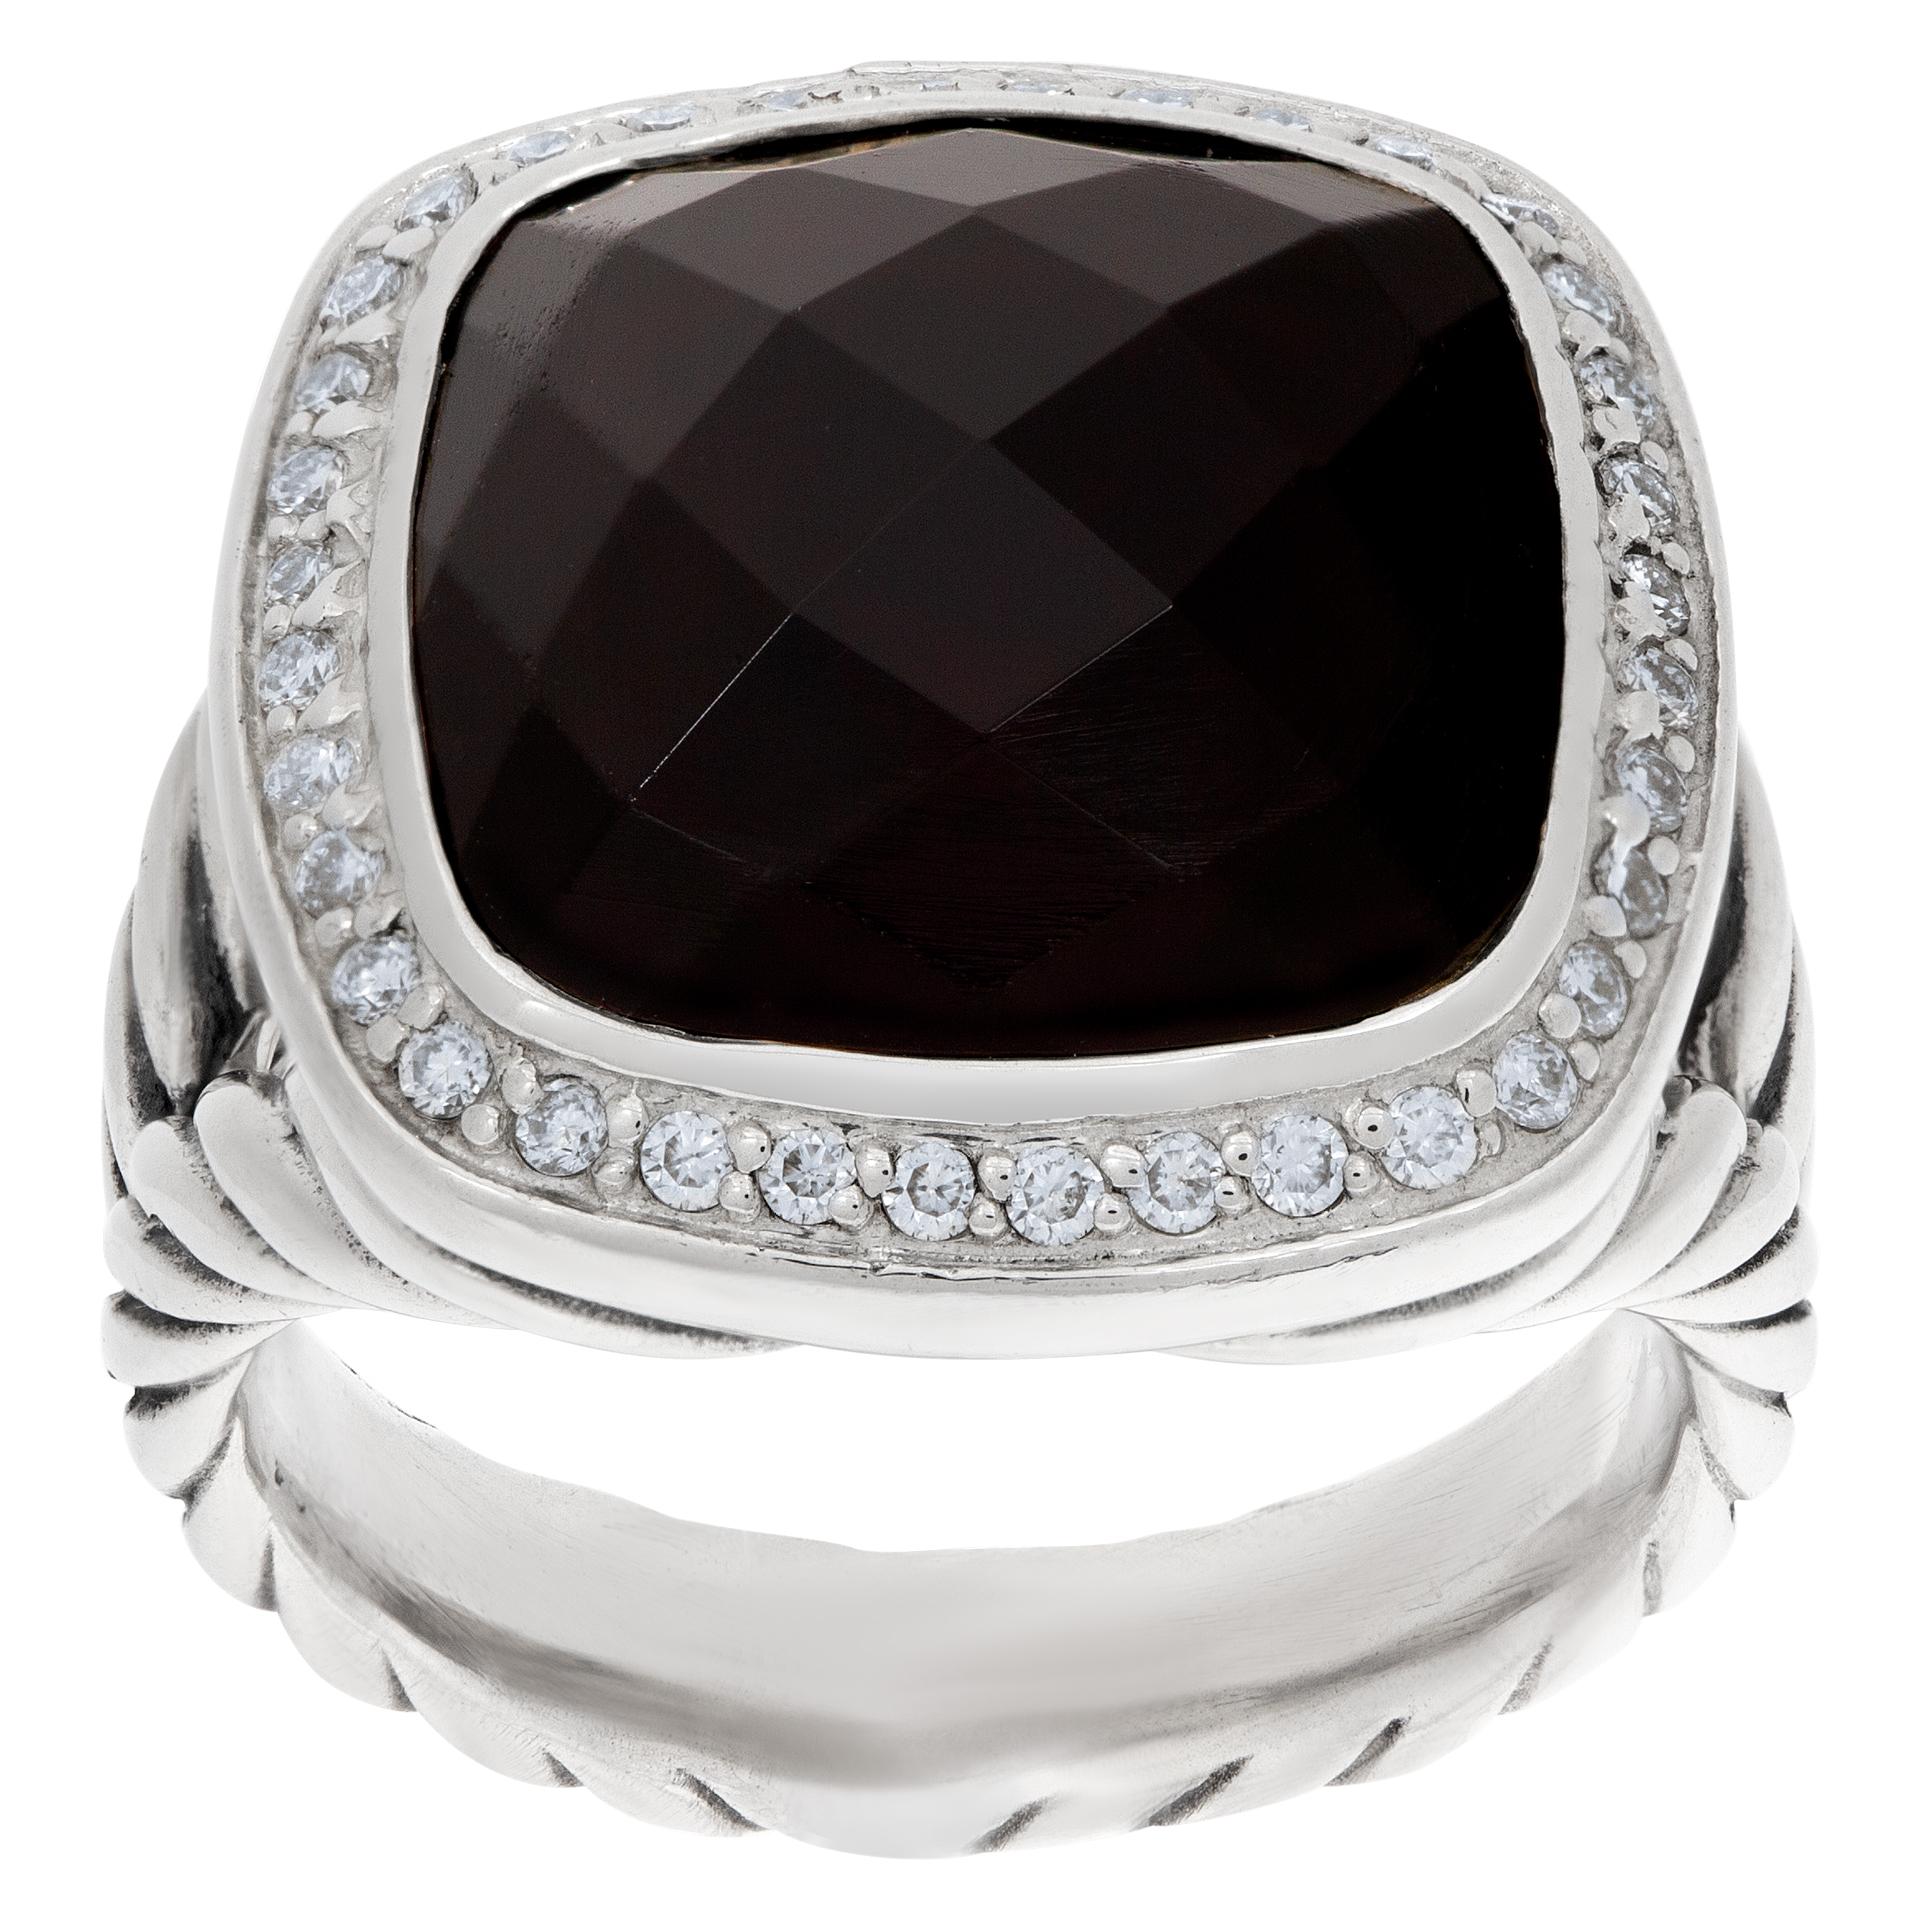 ESTIMATED RETAIL: $1,475.00 YOUR PRICE: $1,050.00 - David Yurman Albion cocktail ring in sterling silver, featuring a cushion onyx gemstone, and 0.35 carats of round brilliant cut diamonds. Size 6.5